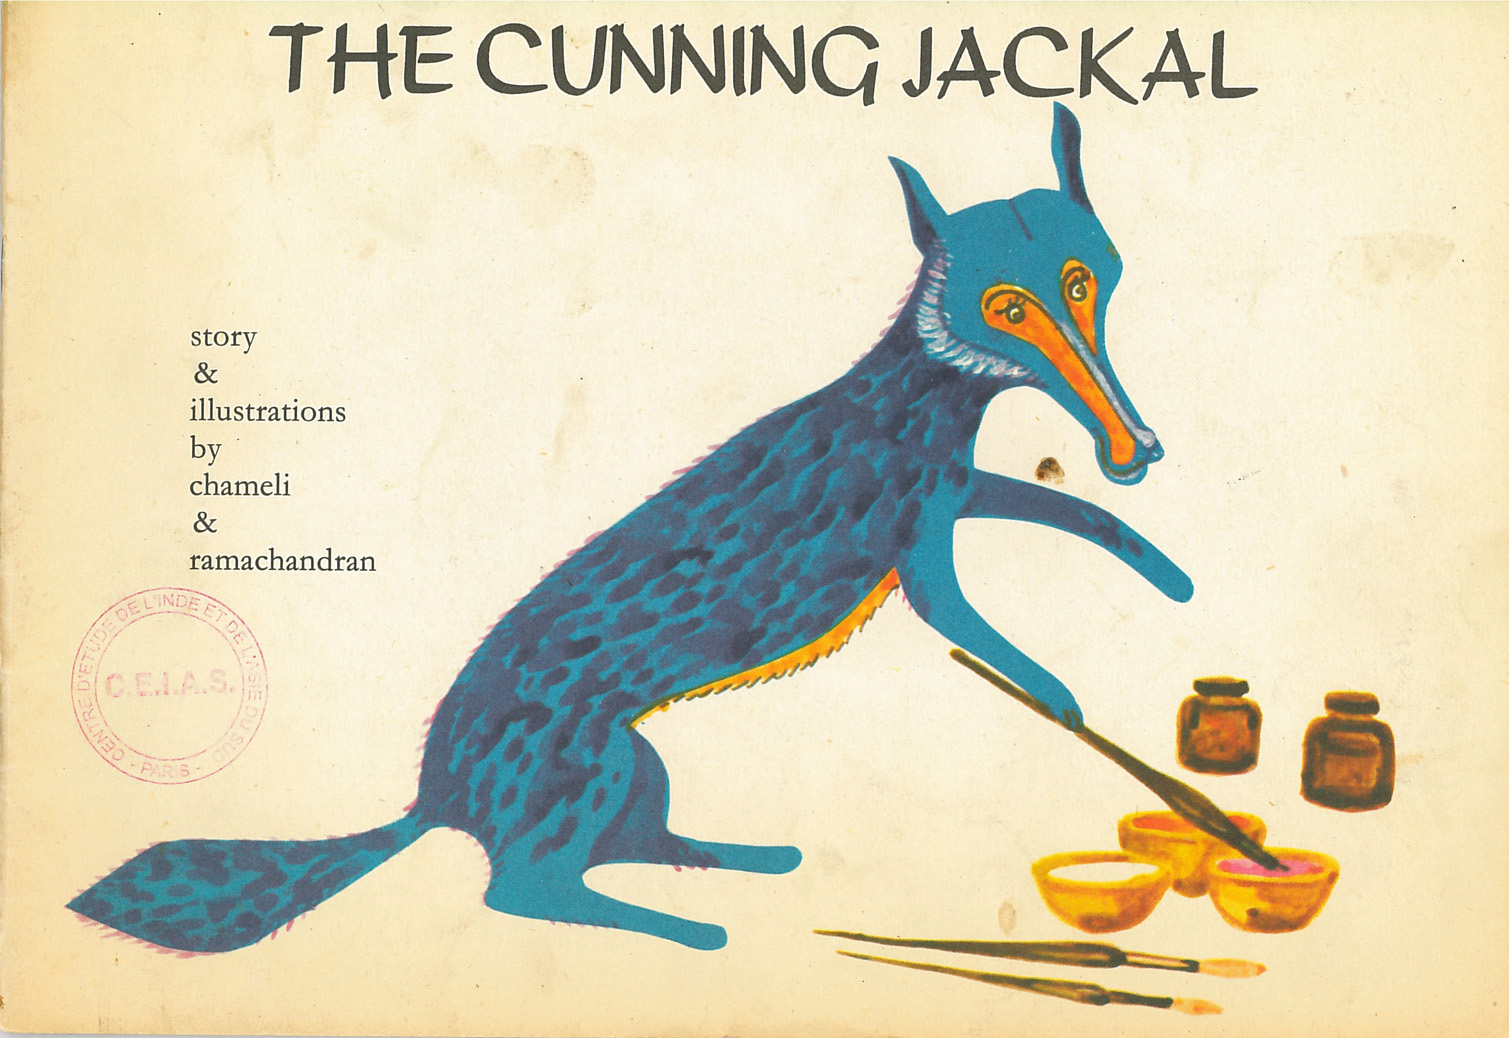 The cunning jackal